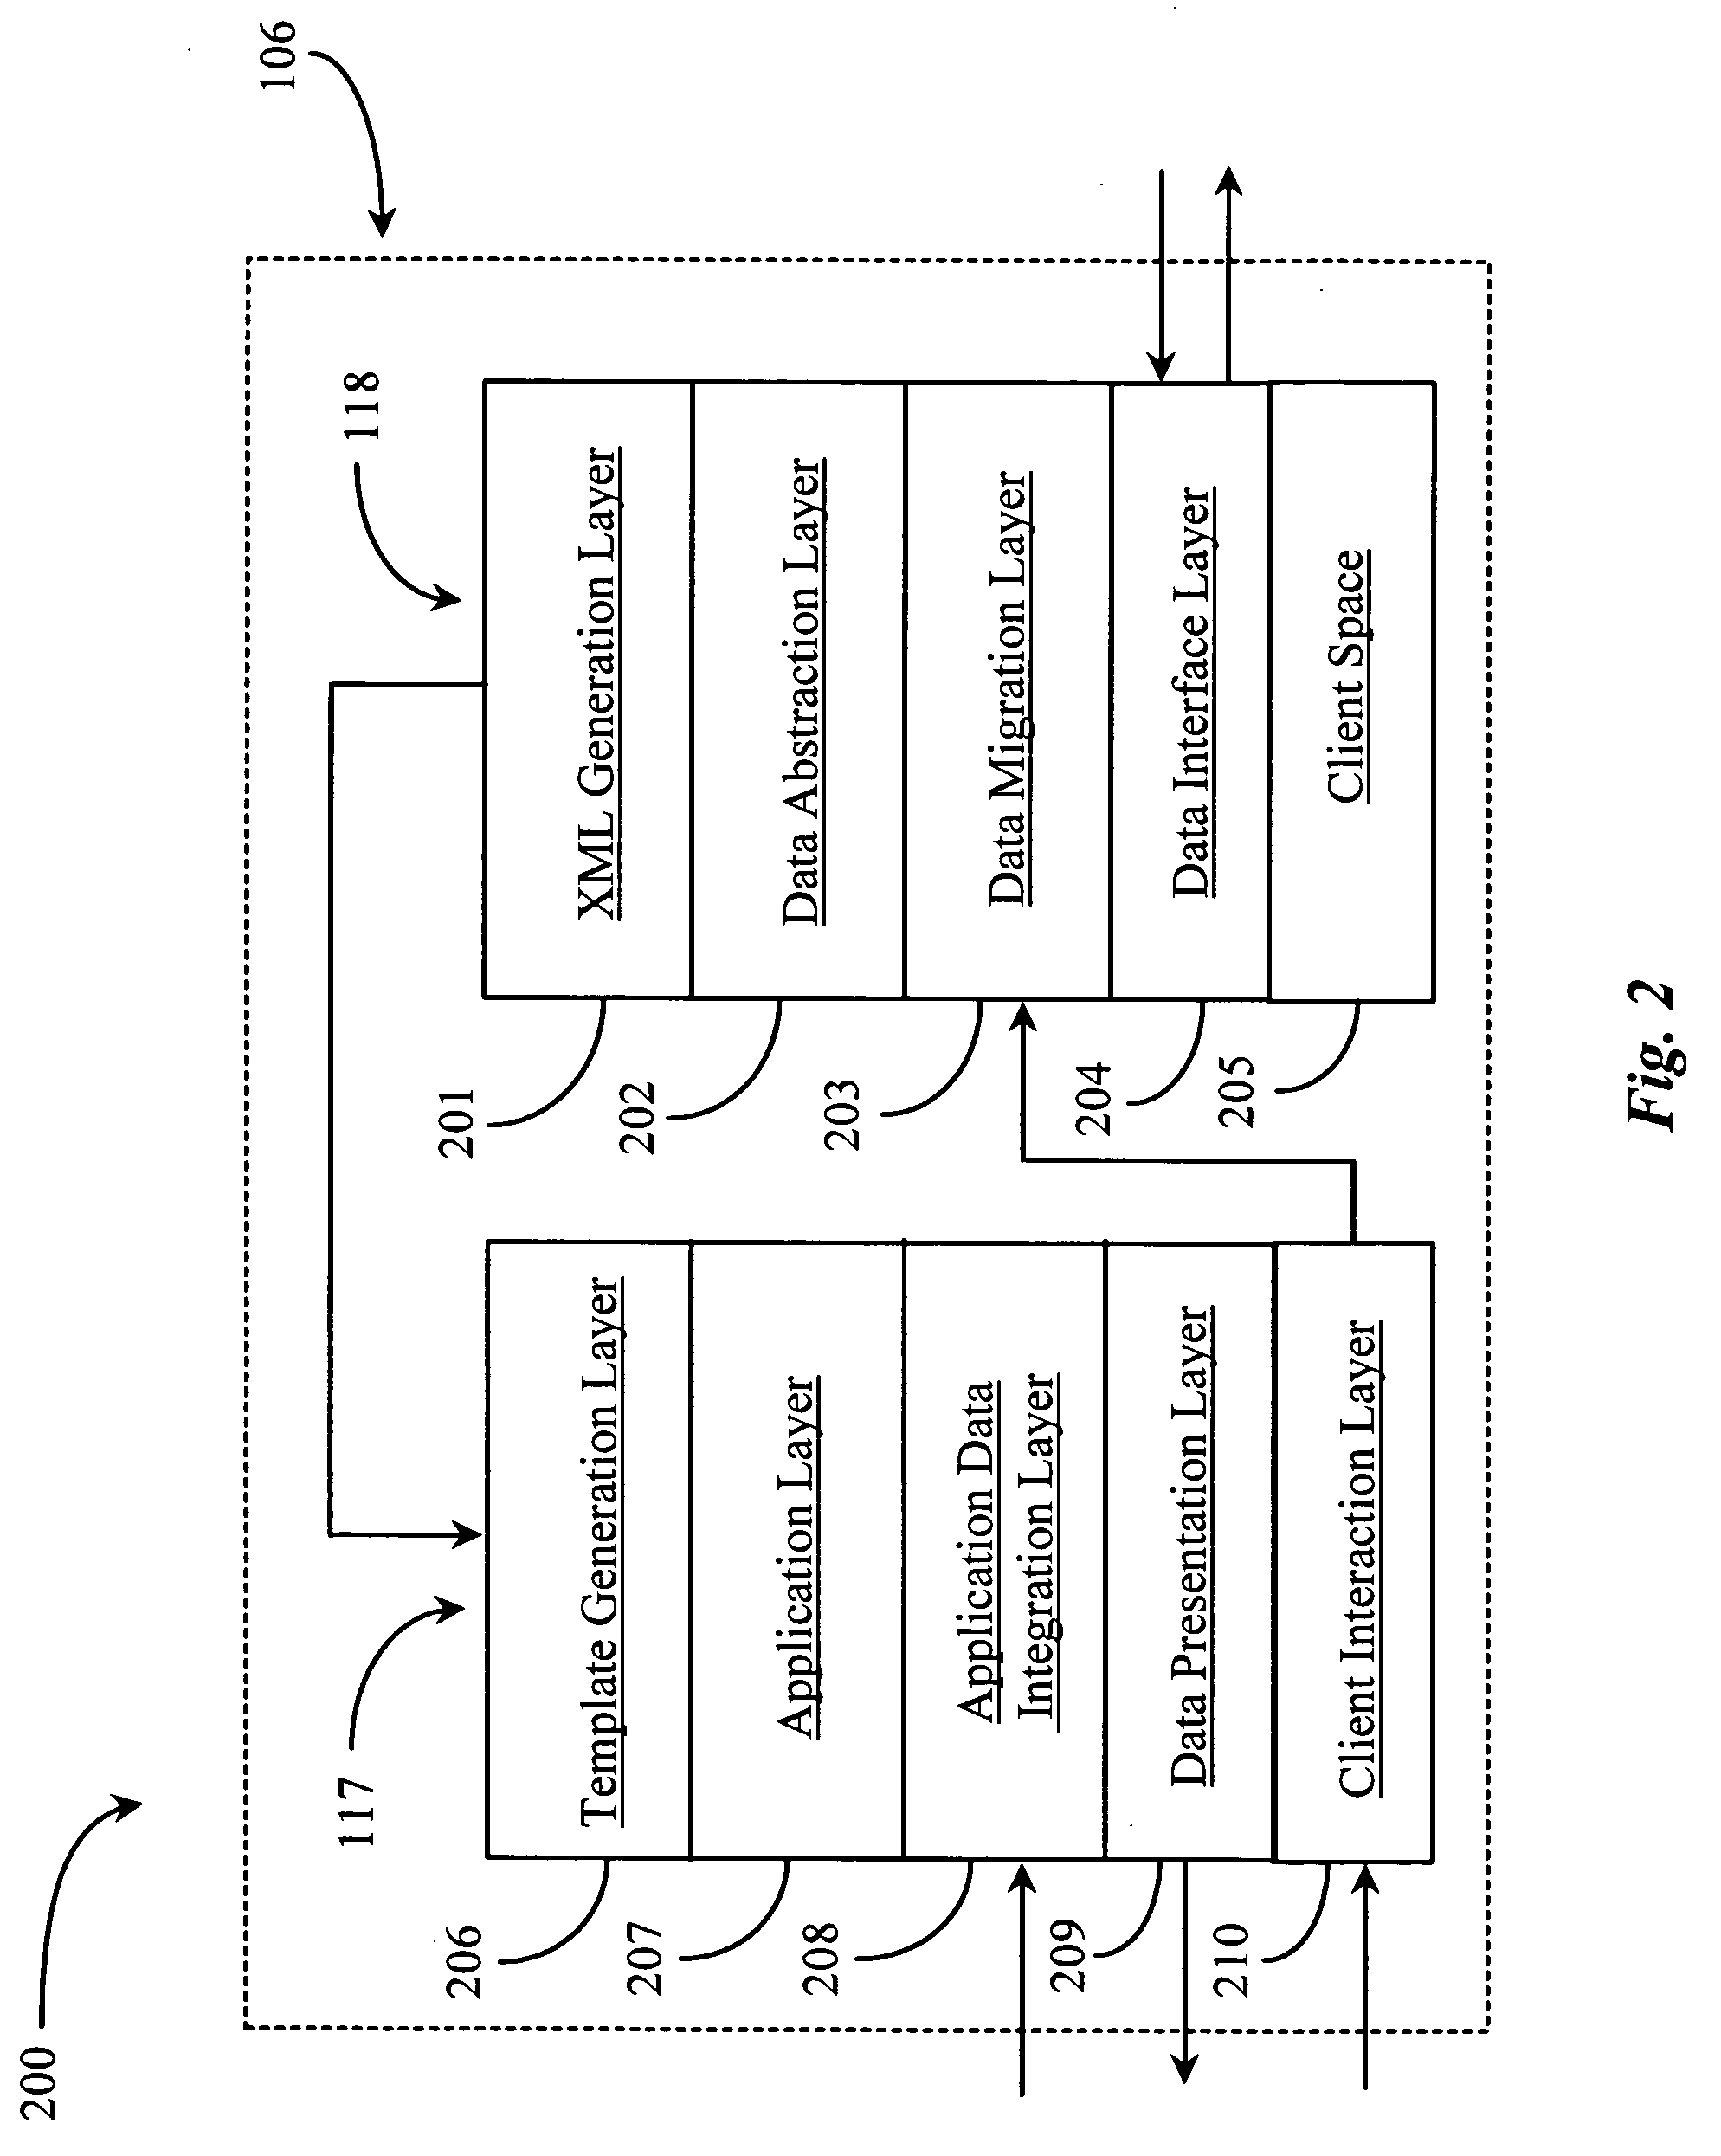 Method and system for providing access to electronic learning and social interaction within a single application